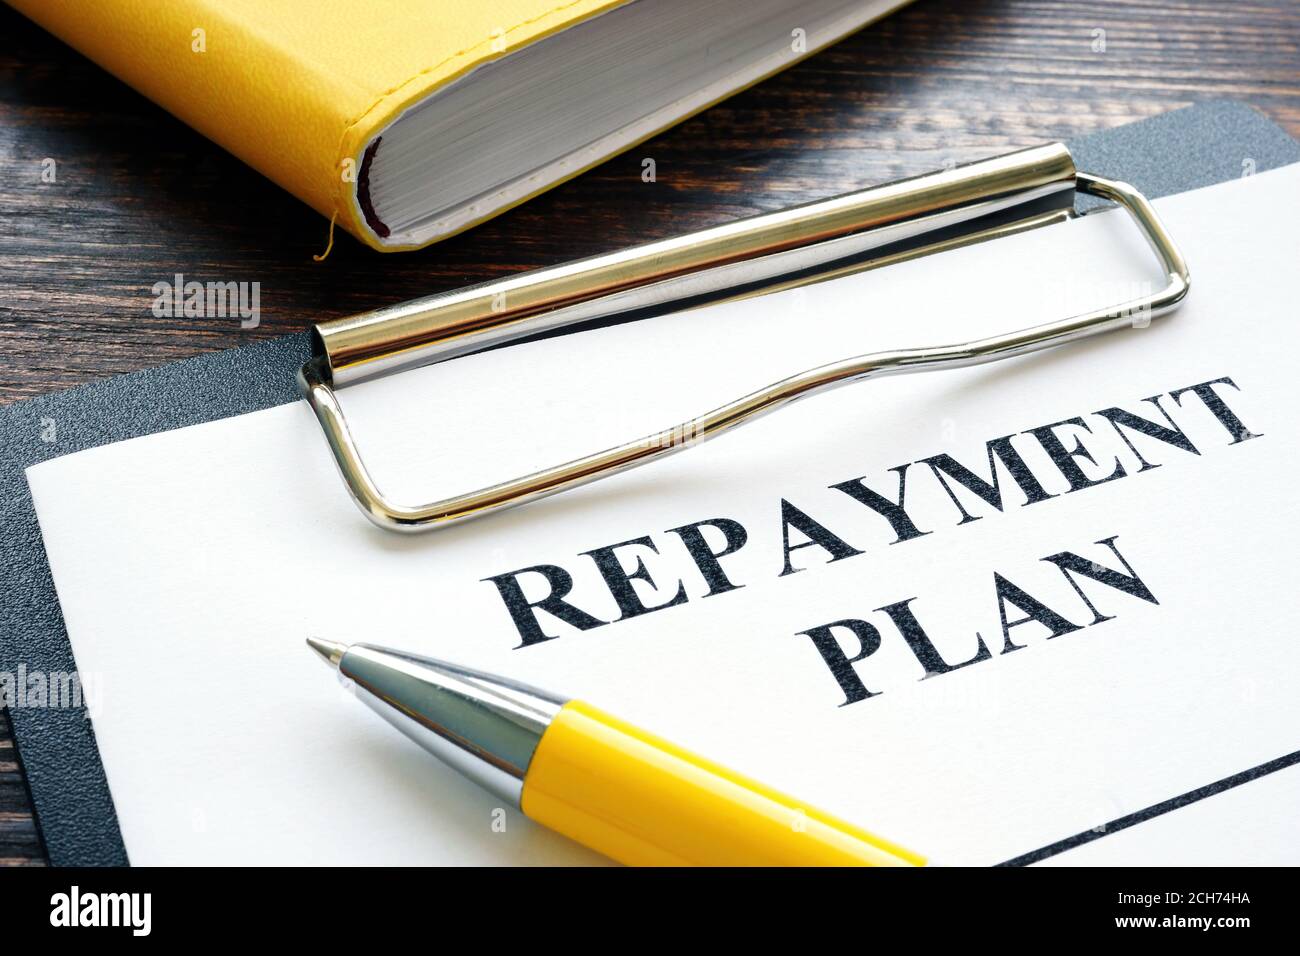 Repayment plan with clipboard and yellow pen. Stock Photo